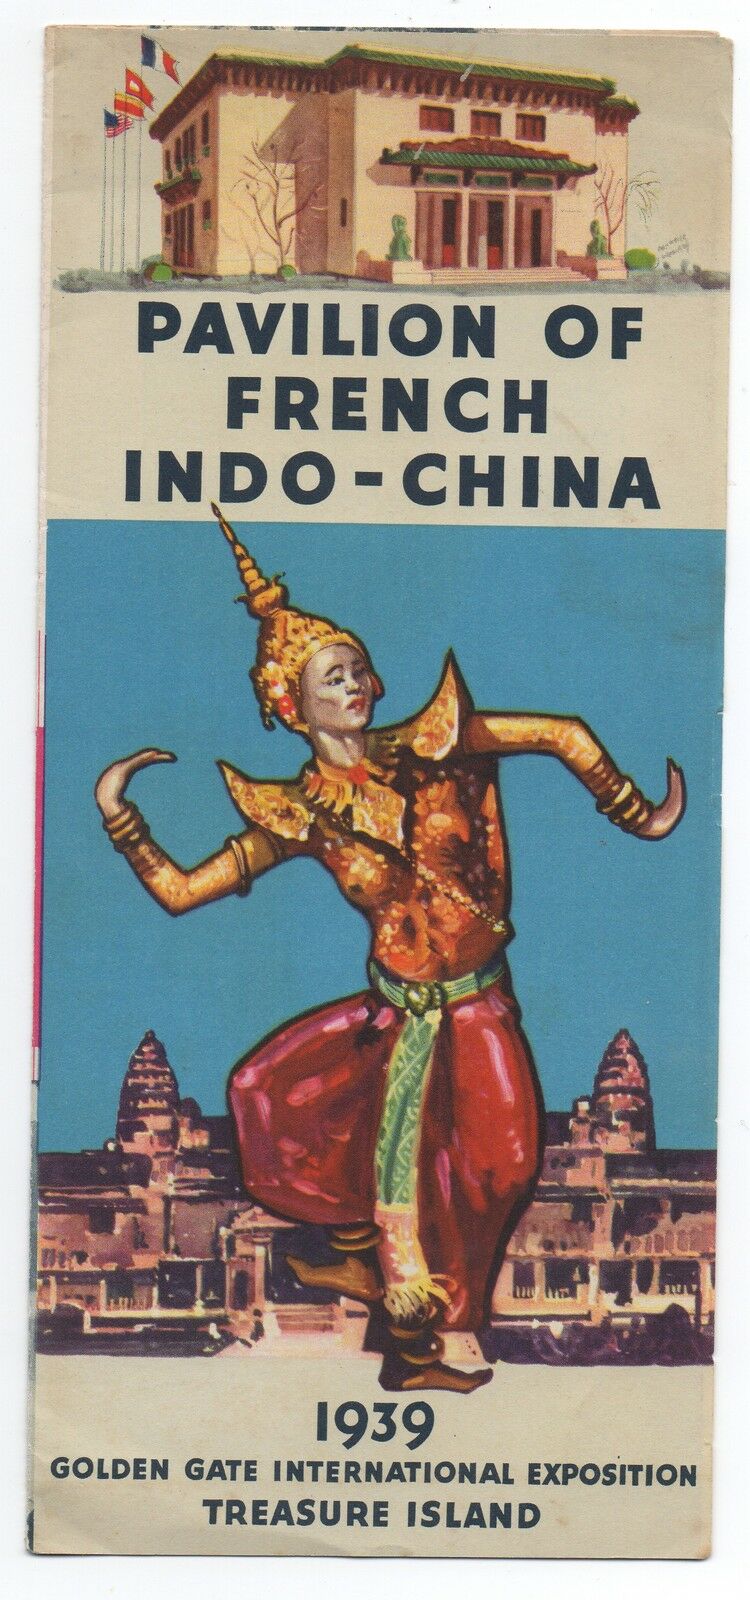 1939 GGE World's Fair Brochure from the Pavilion of French Indo China